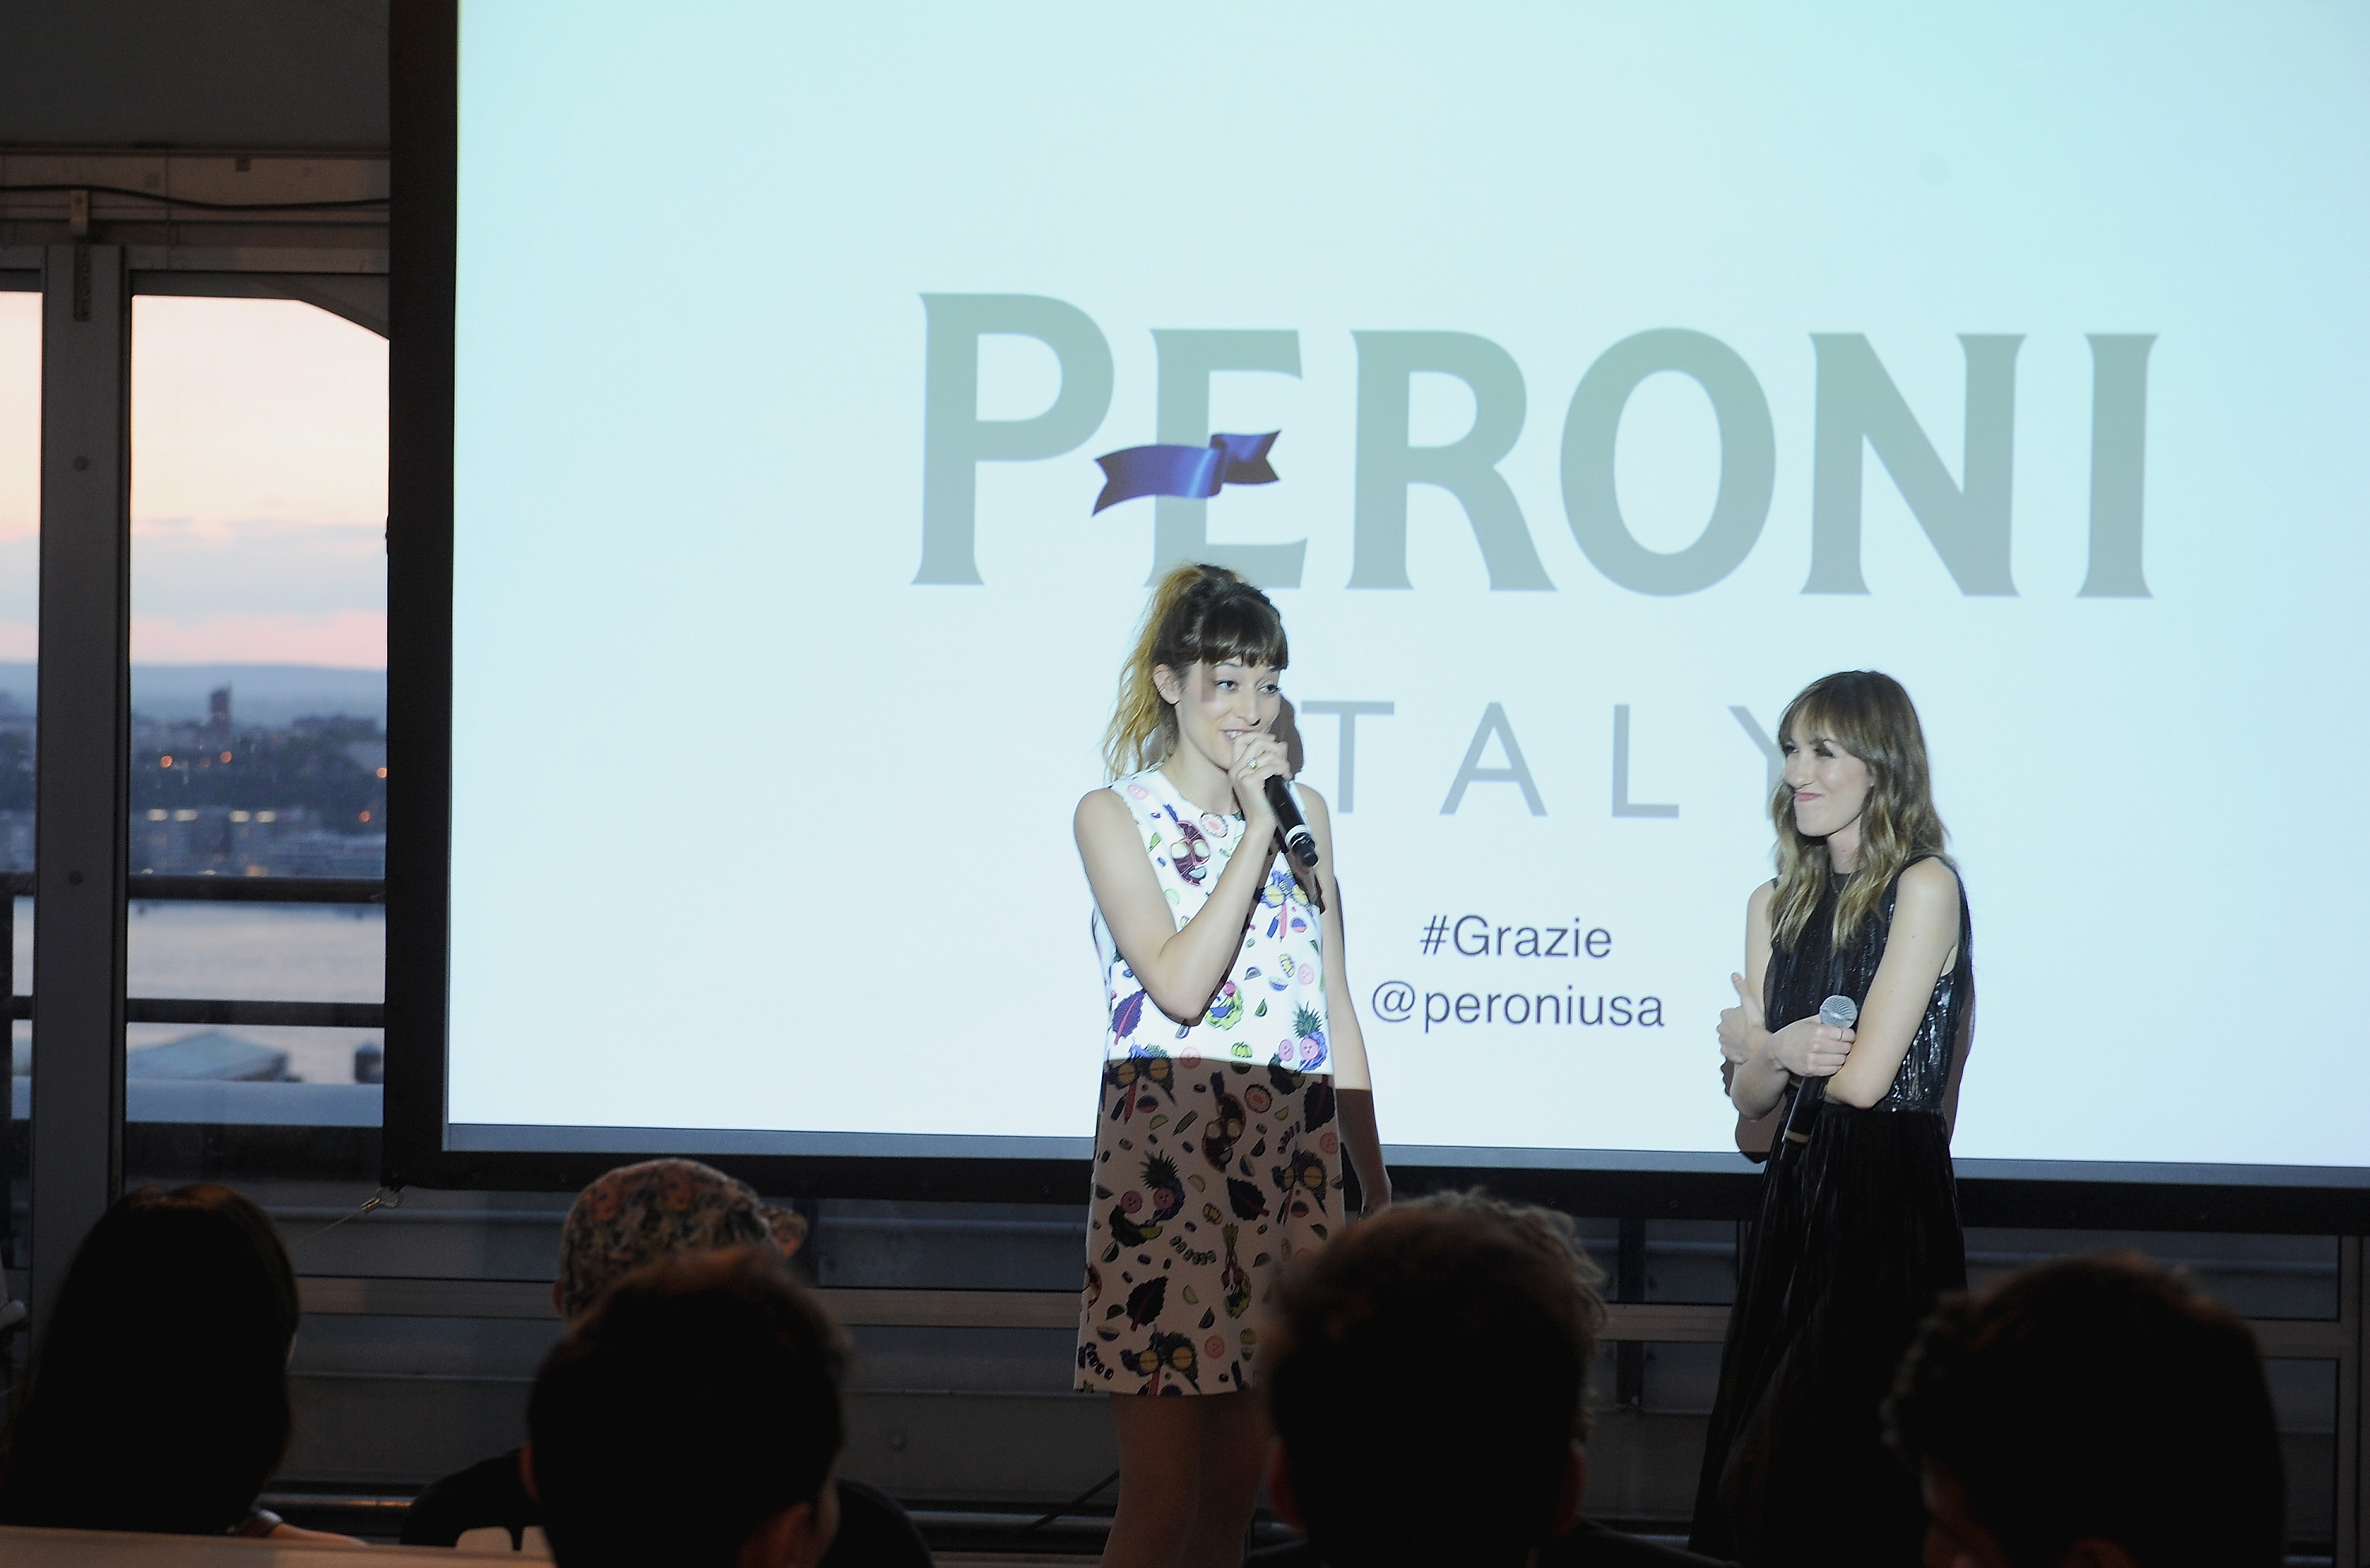 NEW YORK, NY - JUNE 09:  Tracy Antonopoulos and Gia Coppola speak onstage during Peroni Nastro Azzurro and Gia Coppola Celebrate Grazie Cinema Series at Hudson Hotel on June 9, 2015 in New York City.  (Photo by Craig Barritt/Getty Images for Peroni Nastro Azzurro)